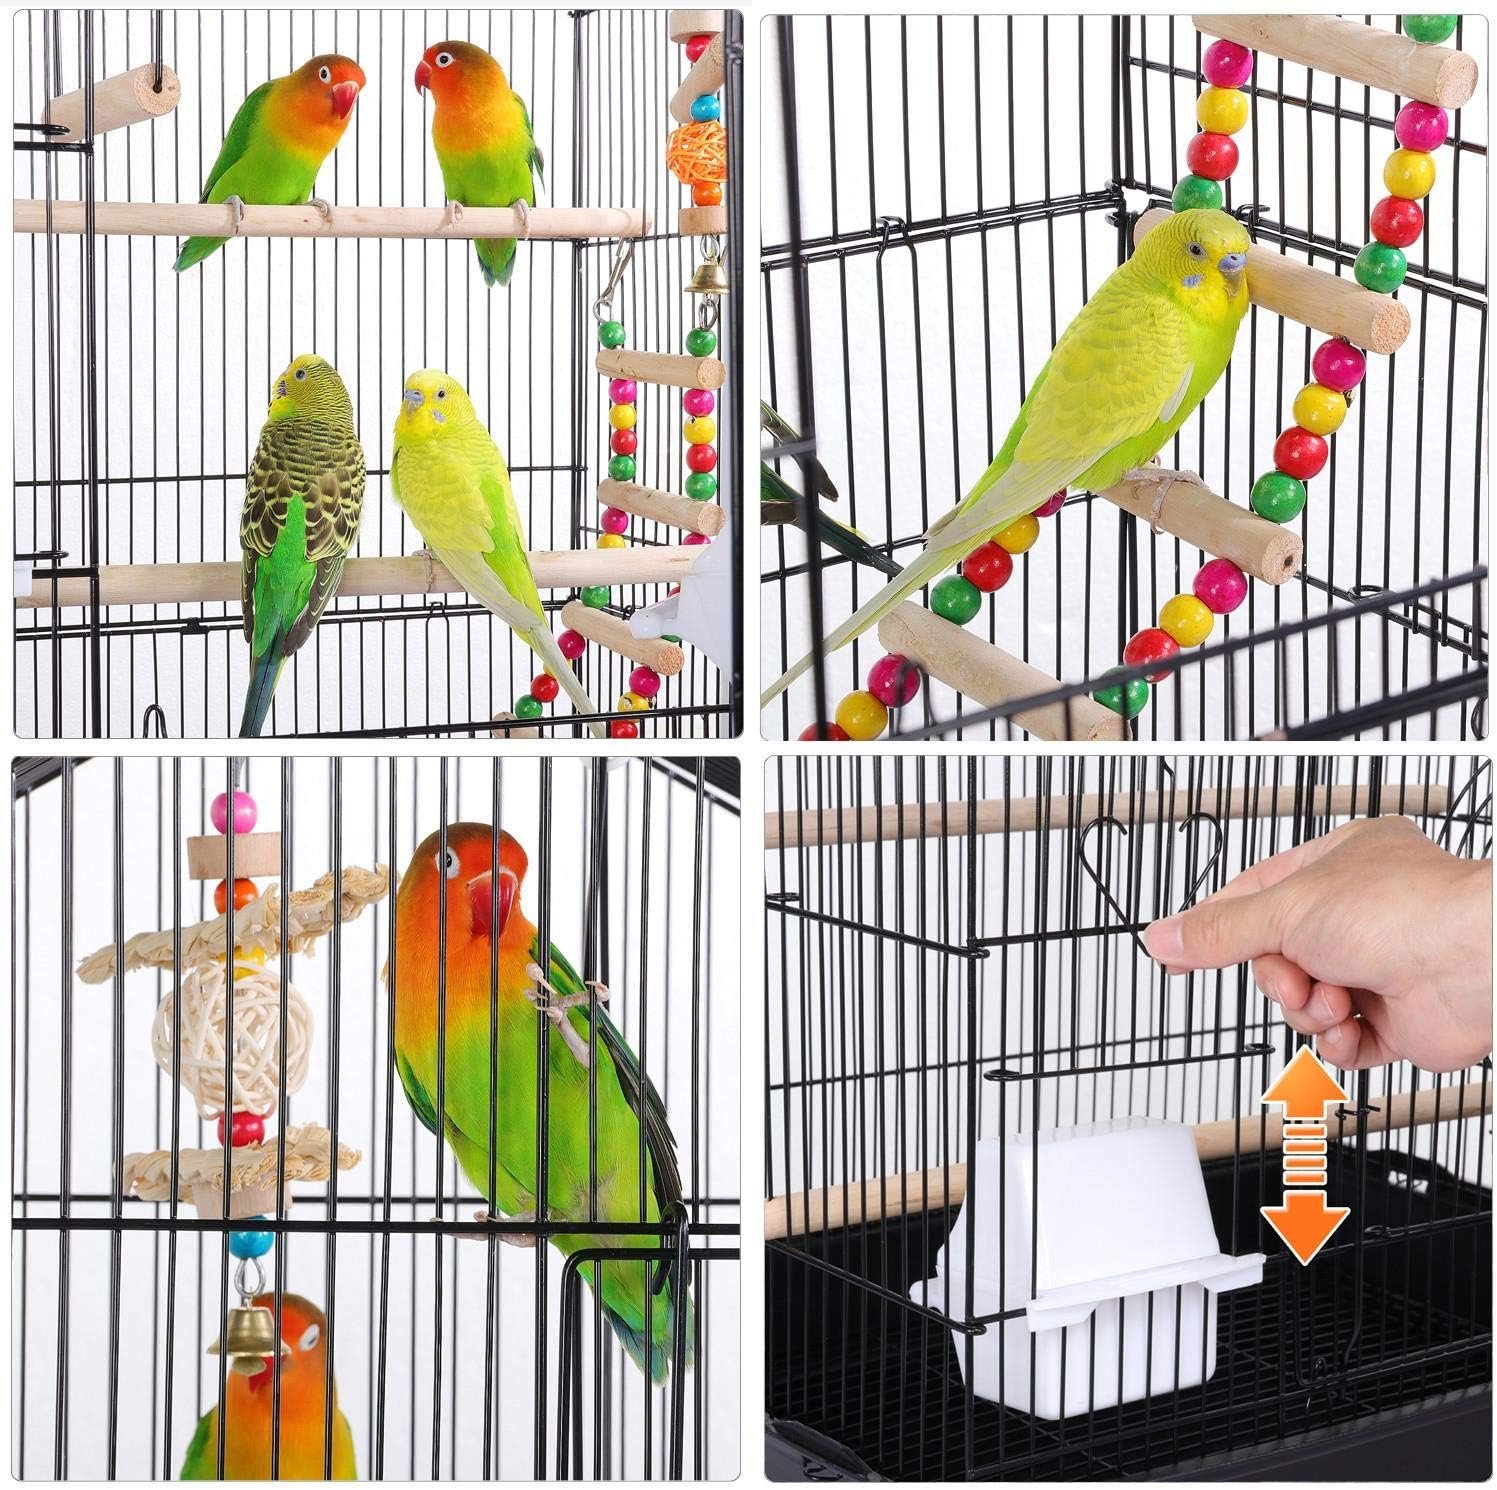 Yaheetech 39-inch Roof Top Large Flight Parrot Bird Cage for Small Quaker Parrot Cockatiel Sun Parakeet Green Cheek Conure Budgie Finch Lovebird Canary Pet Bird Cage w/Toys